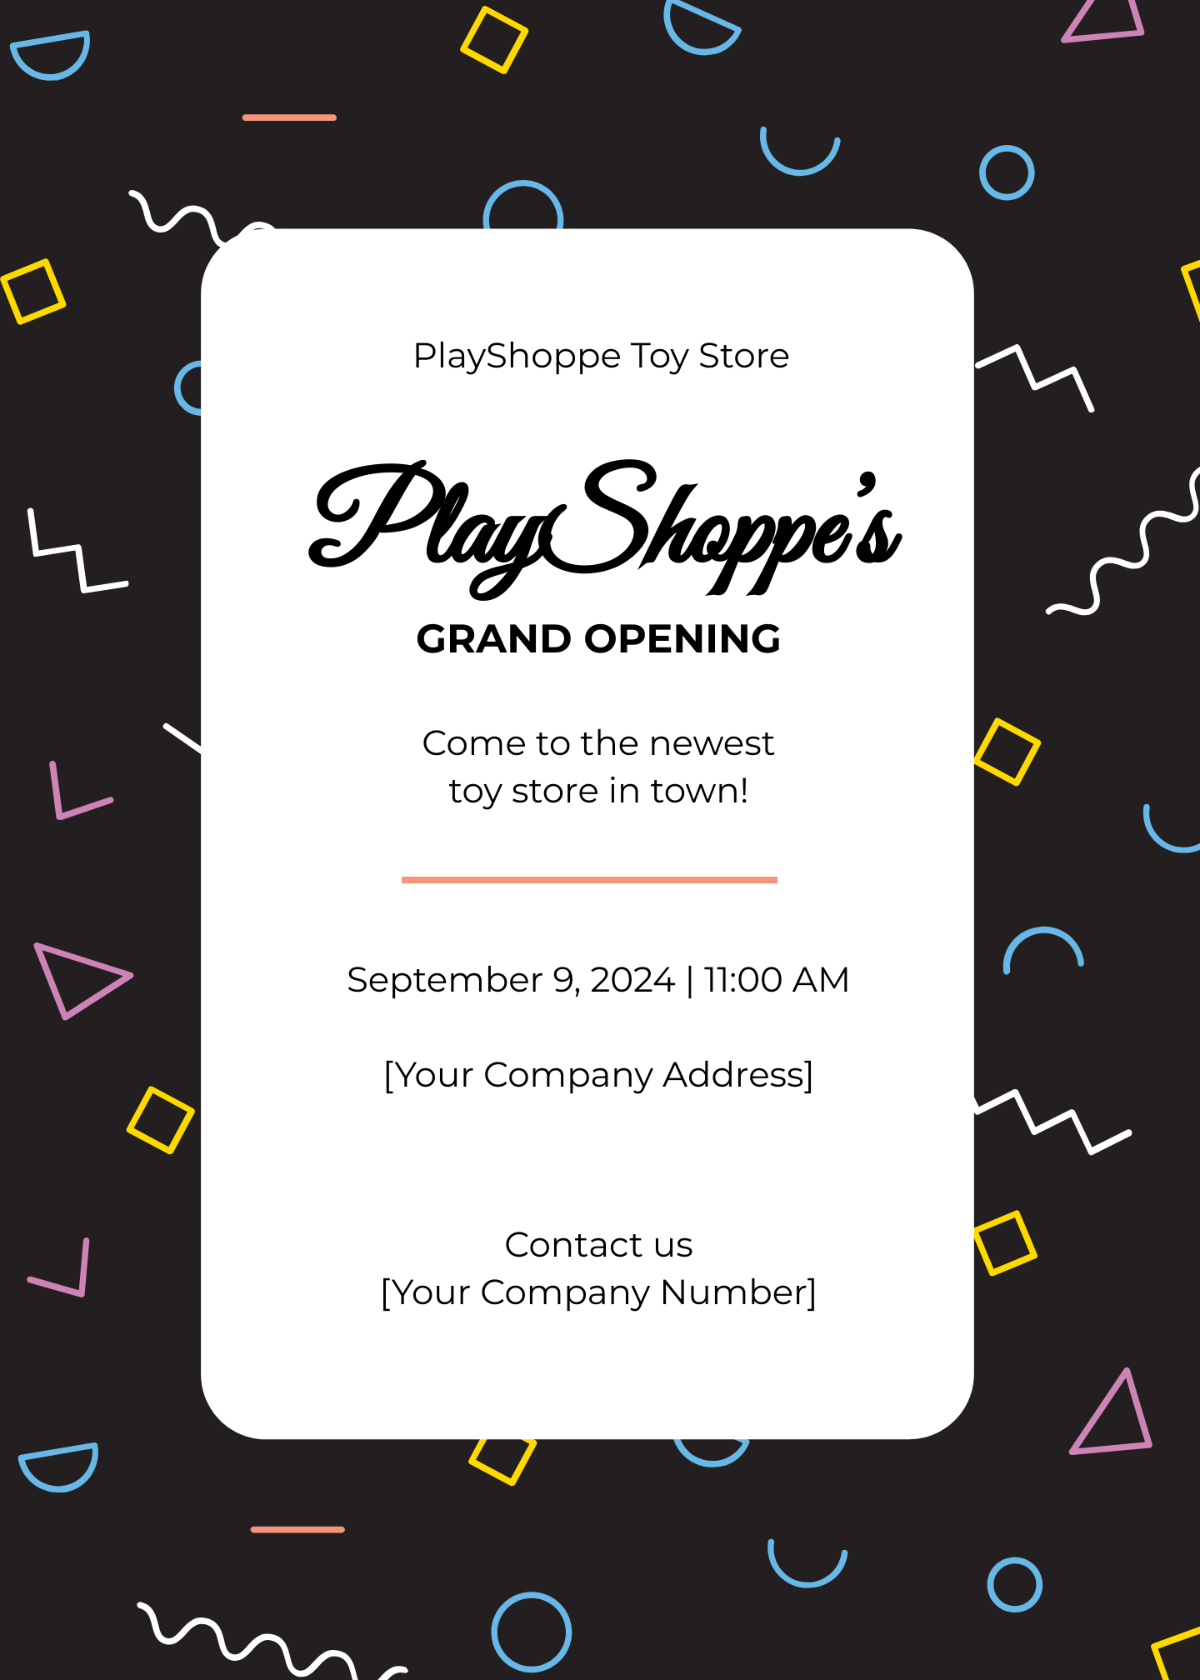 Grand Opening Event Invitation Template